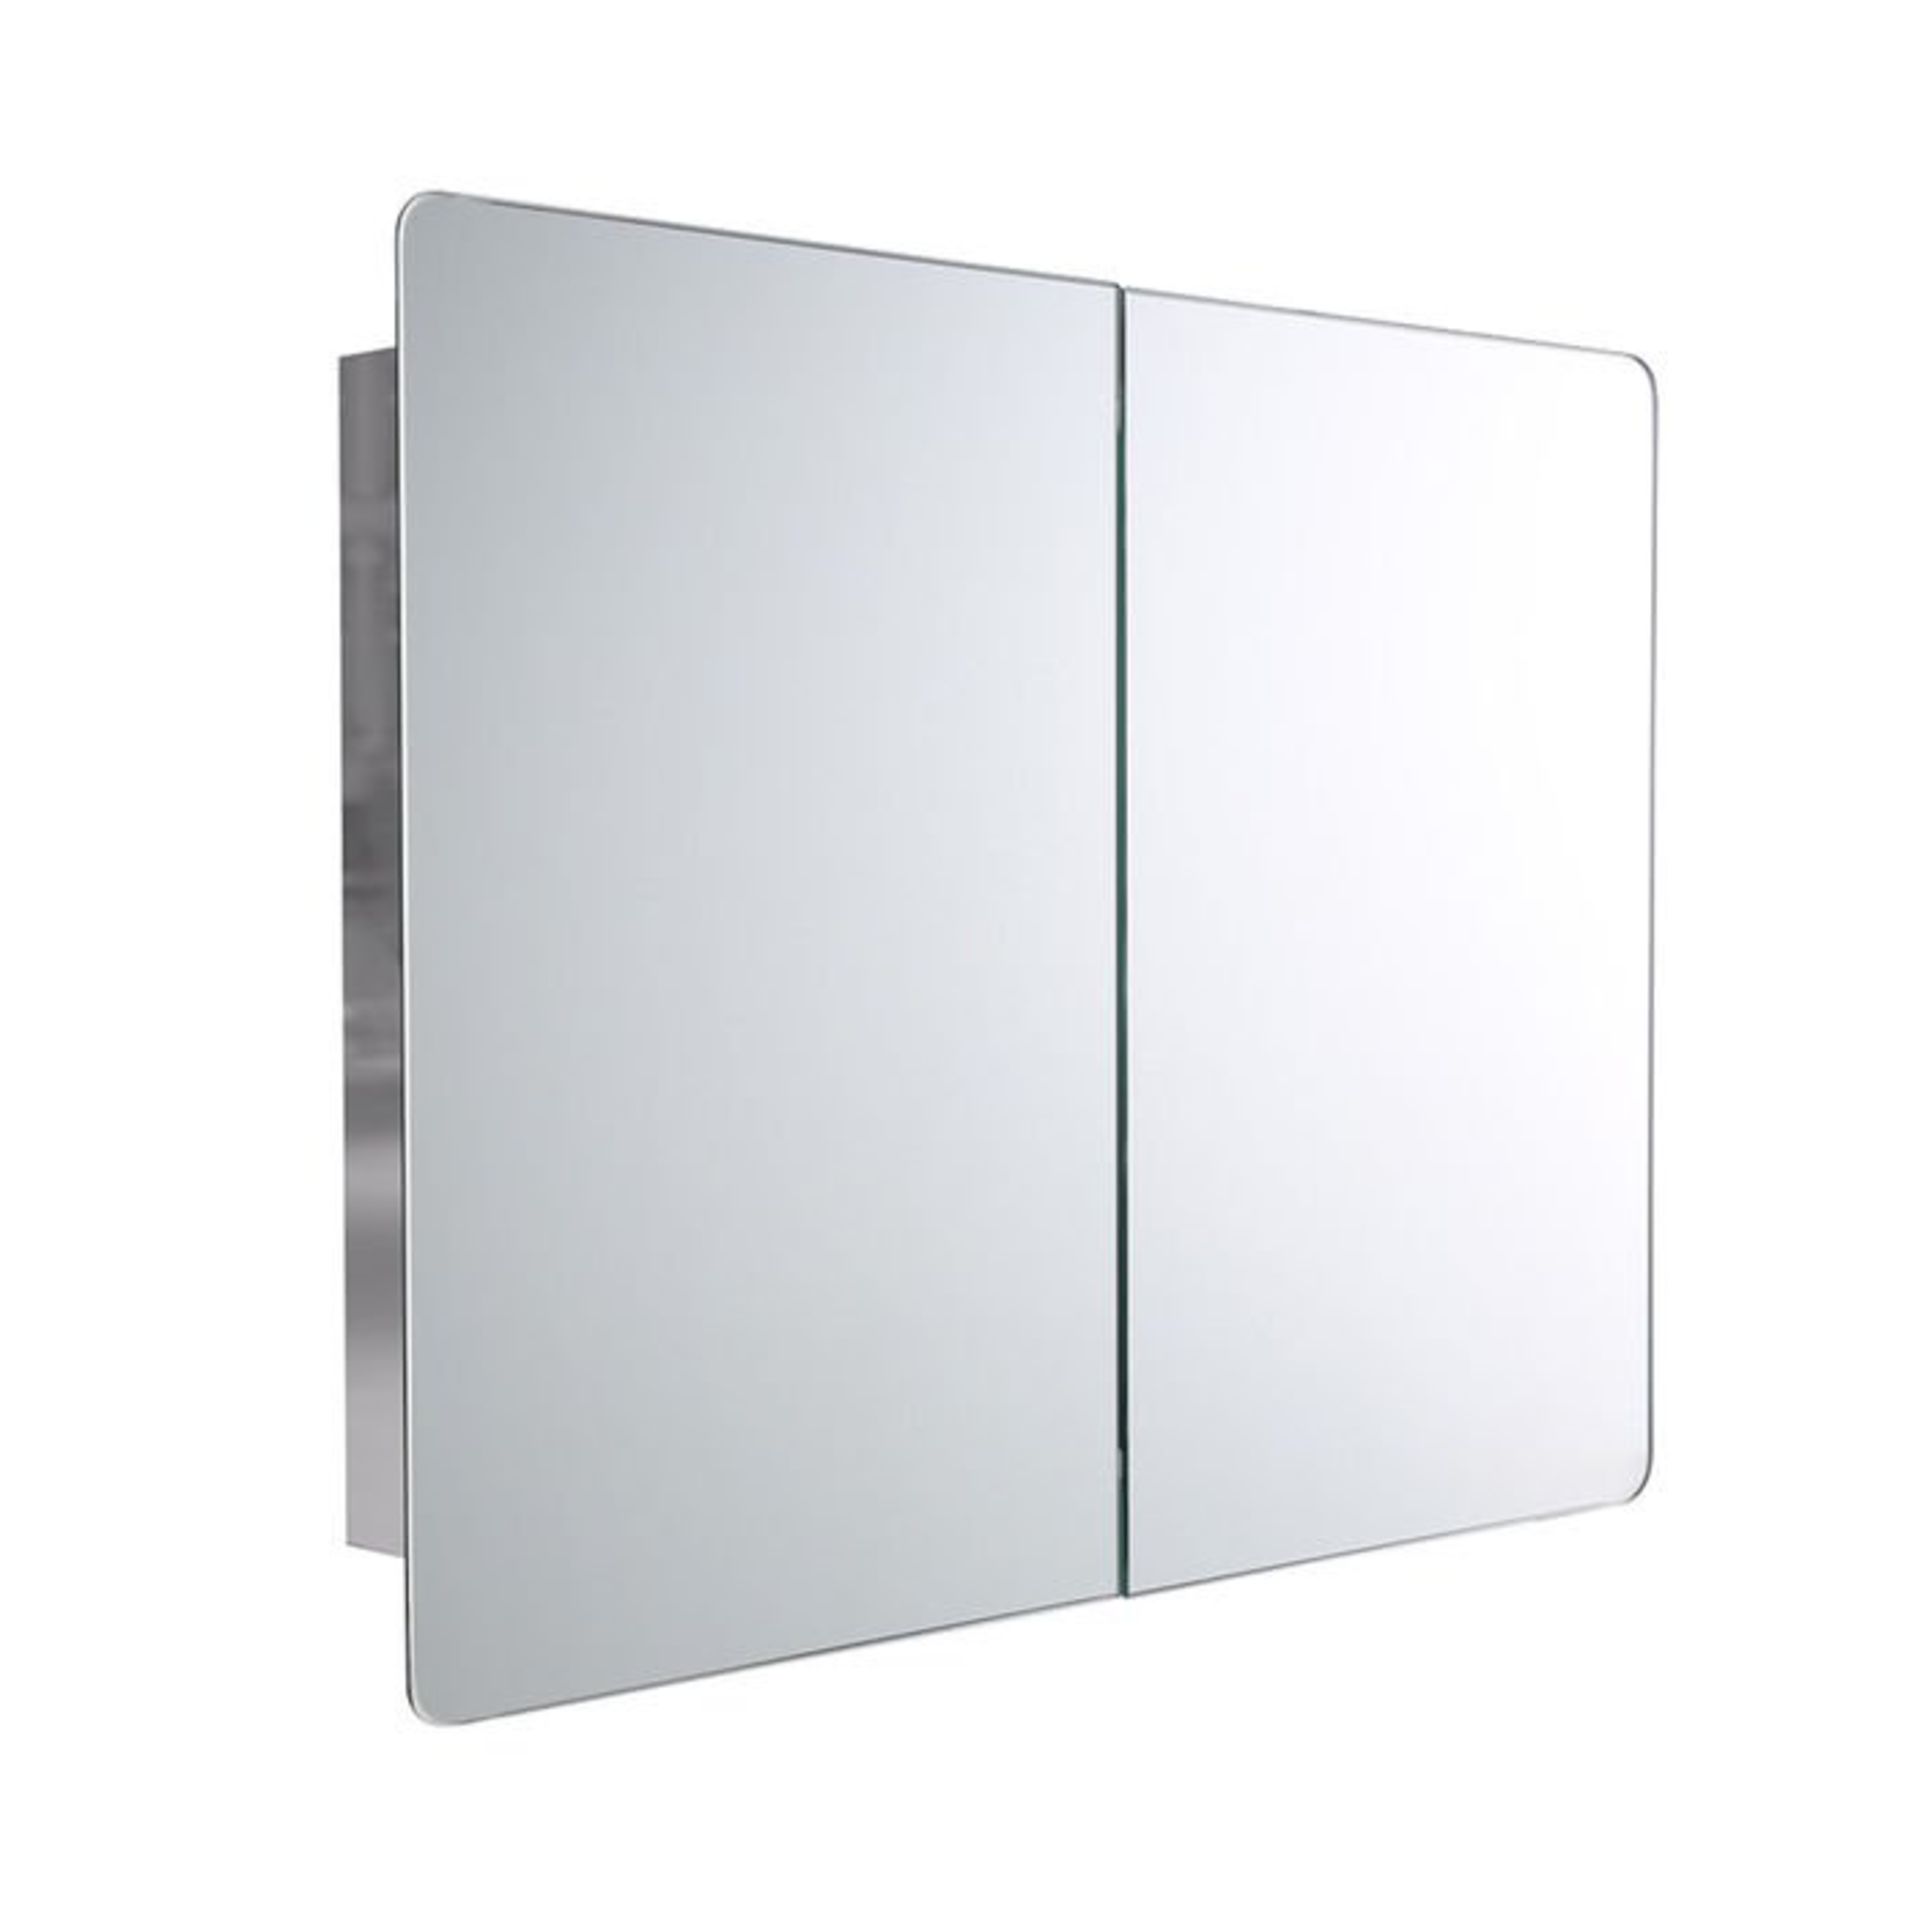 (L19)800x600 Curved Double Door Liberty Stainless Steel Mirror Cabinet. Made from high-grade - Image 3 of 3